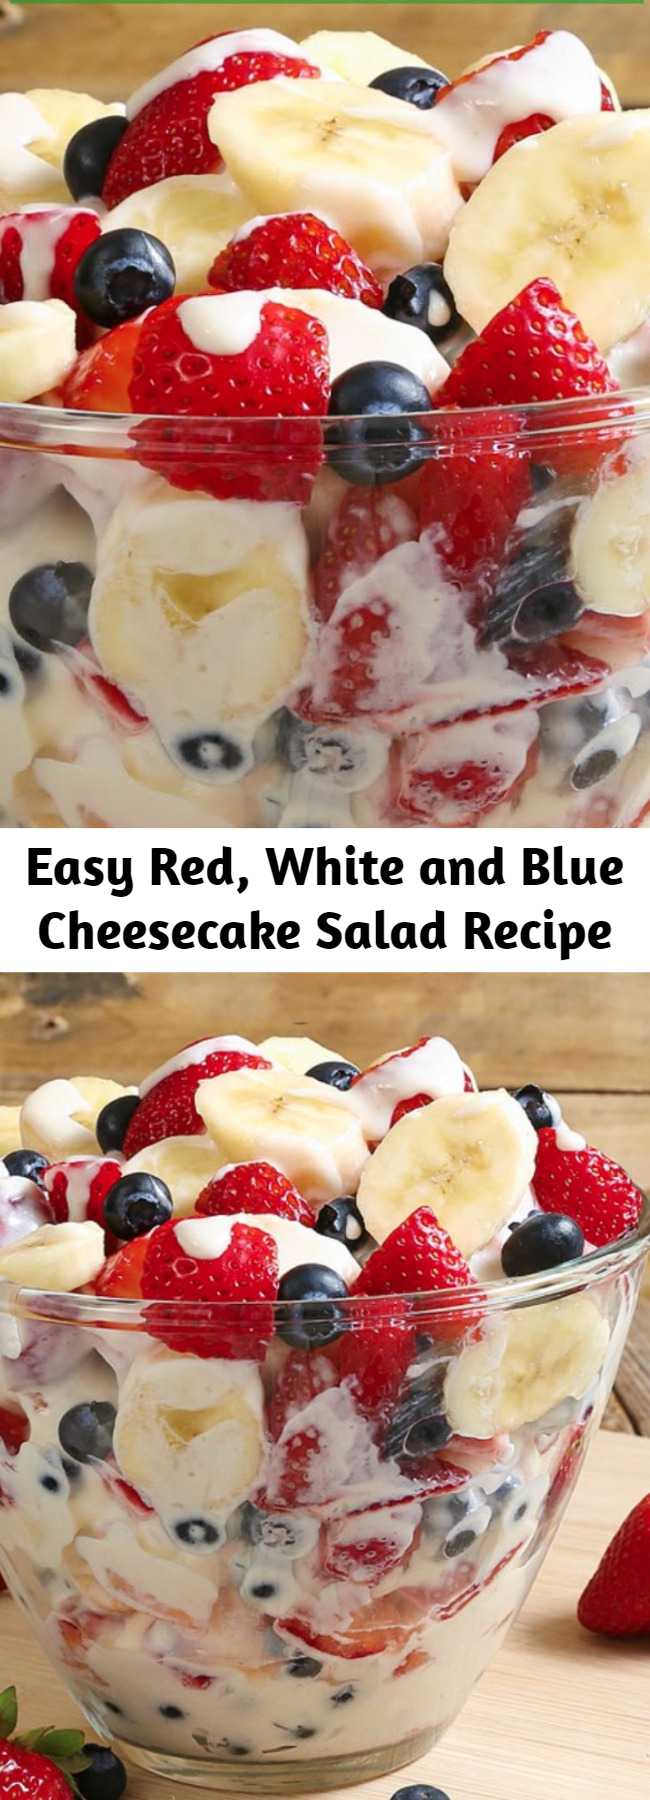 Easy Red, White and Blue Cheesecake Salad Recipe - Red, White and Blue Cheesecake Salad comes together so easy with fresh fruit and a rich and creamy cheesecake filling to create the most glorious fruit salad ever! Every bite is absolutely bursting with summer flavor and you are going to go nuts over this recipe! #CheesecakeSalad #FruitSalad #SummerDessert